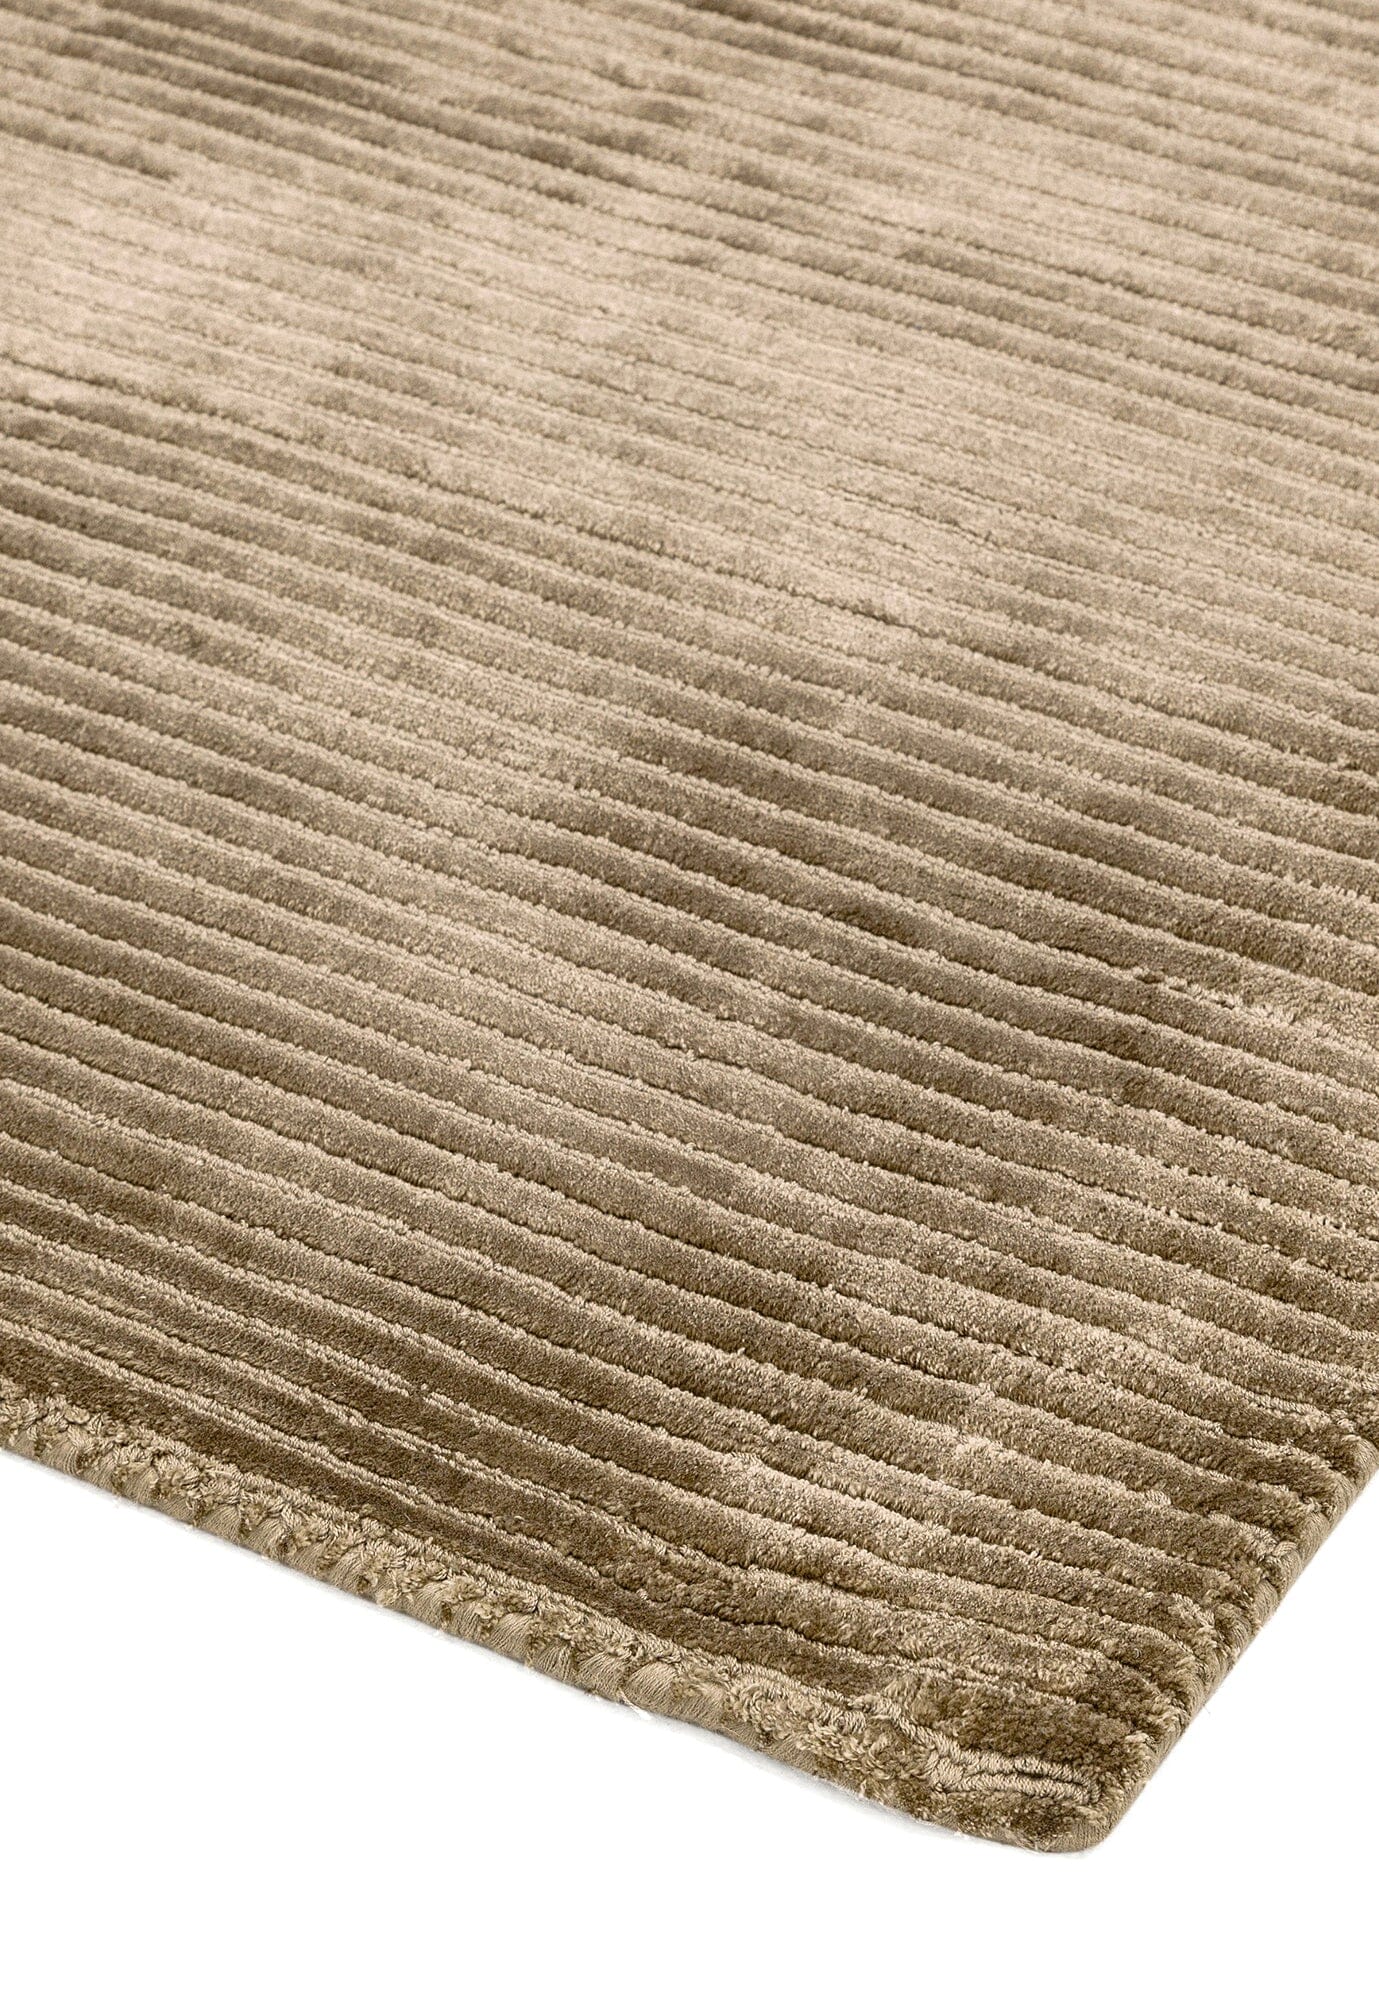  Asiatic Carpets-Asiatic Carpets Bellagio Hand Woven Rug Taupe - 160 x 230cm-Beige, Natural 205 